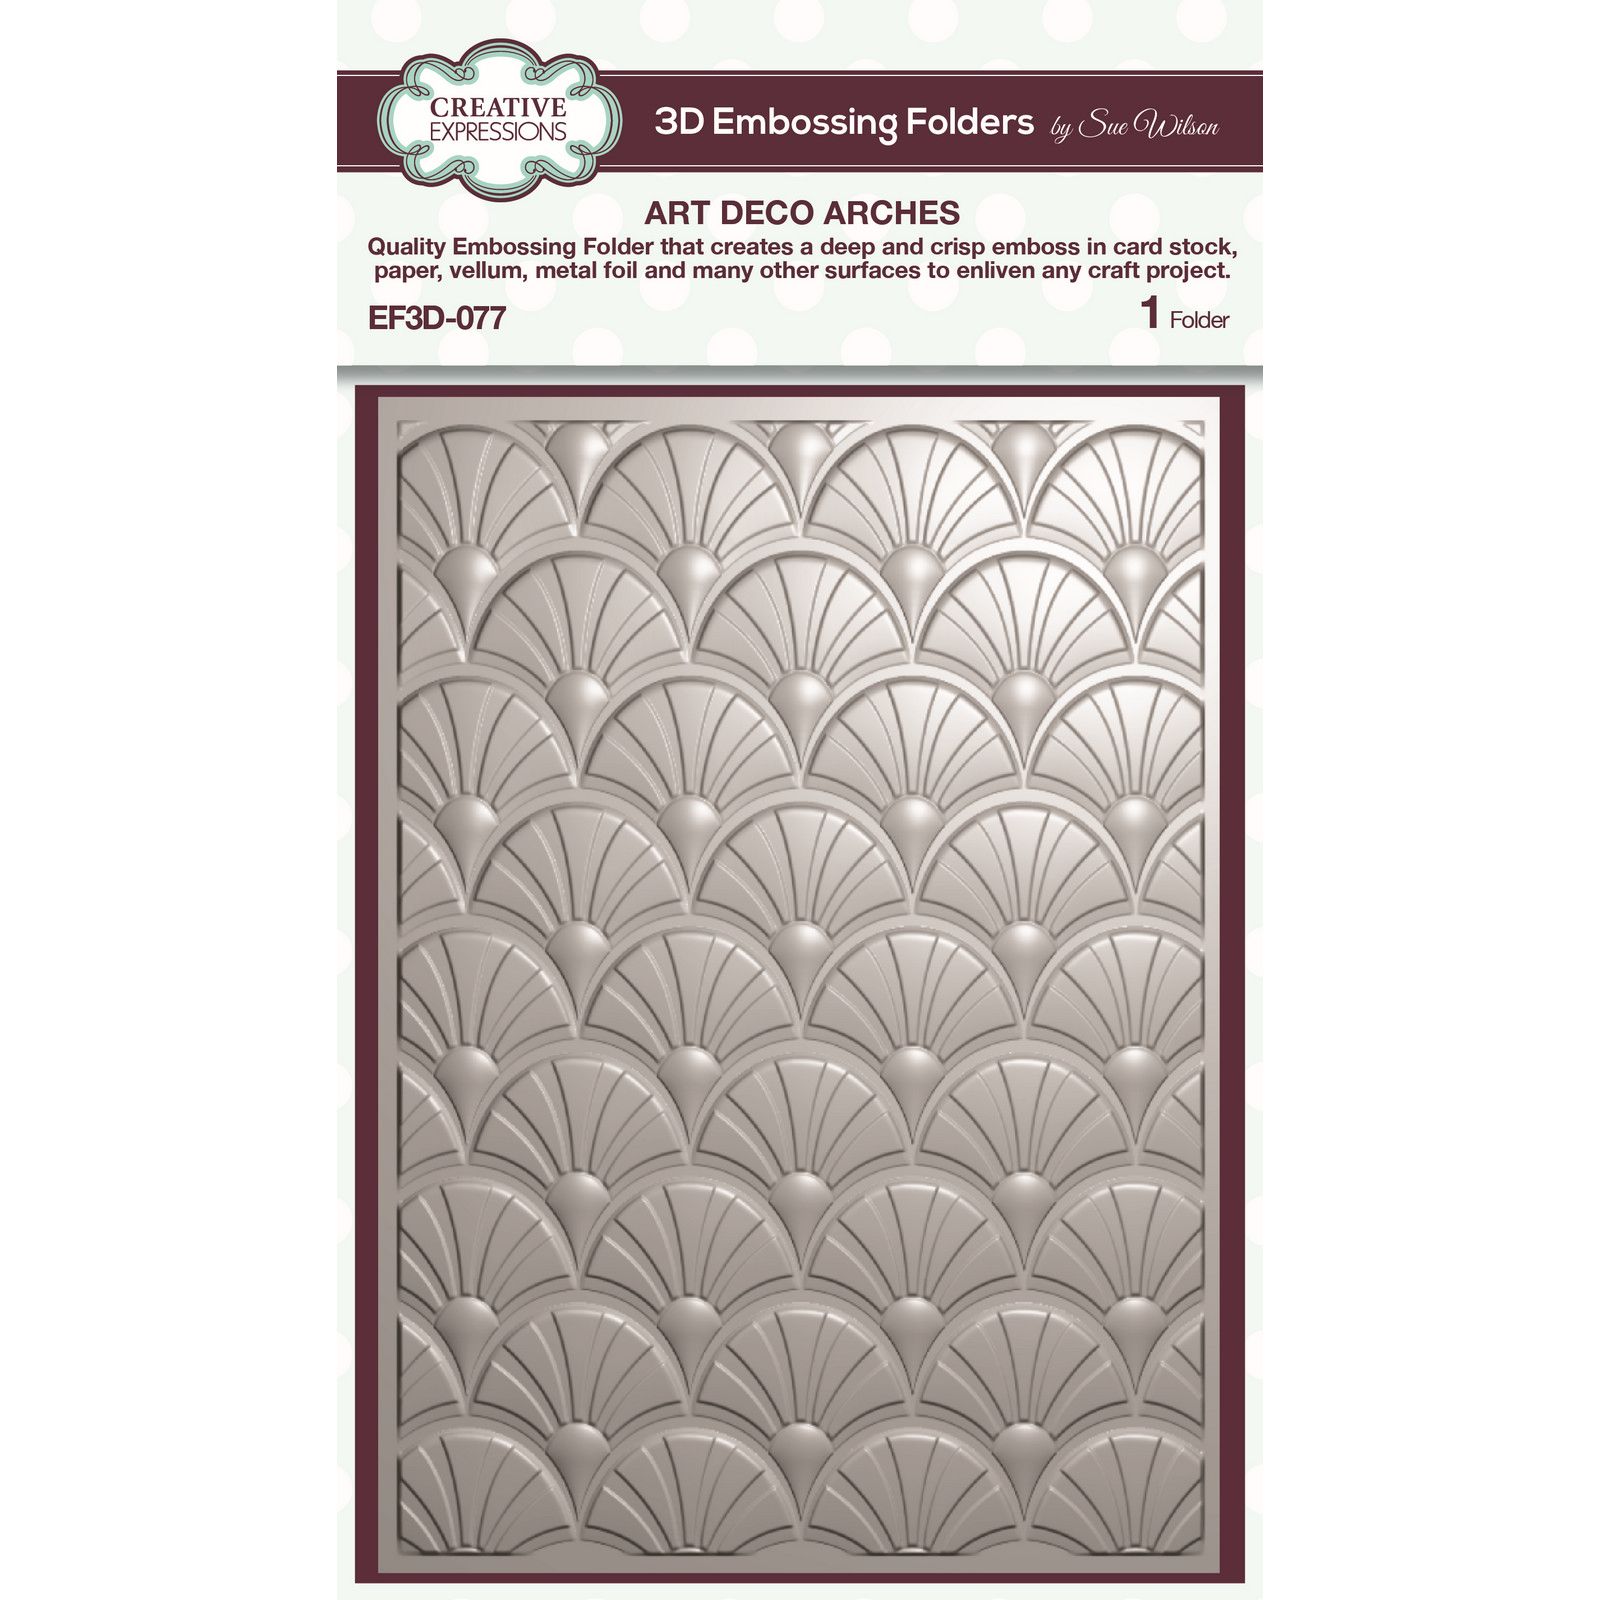 Creative Expressions • Art Deco 3D Embossing Folder Arches